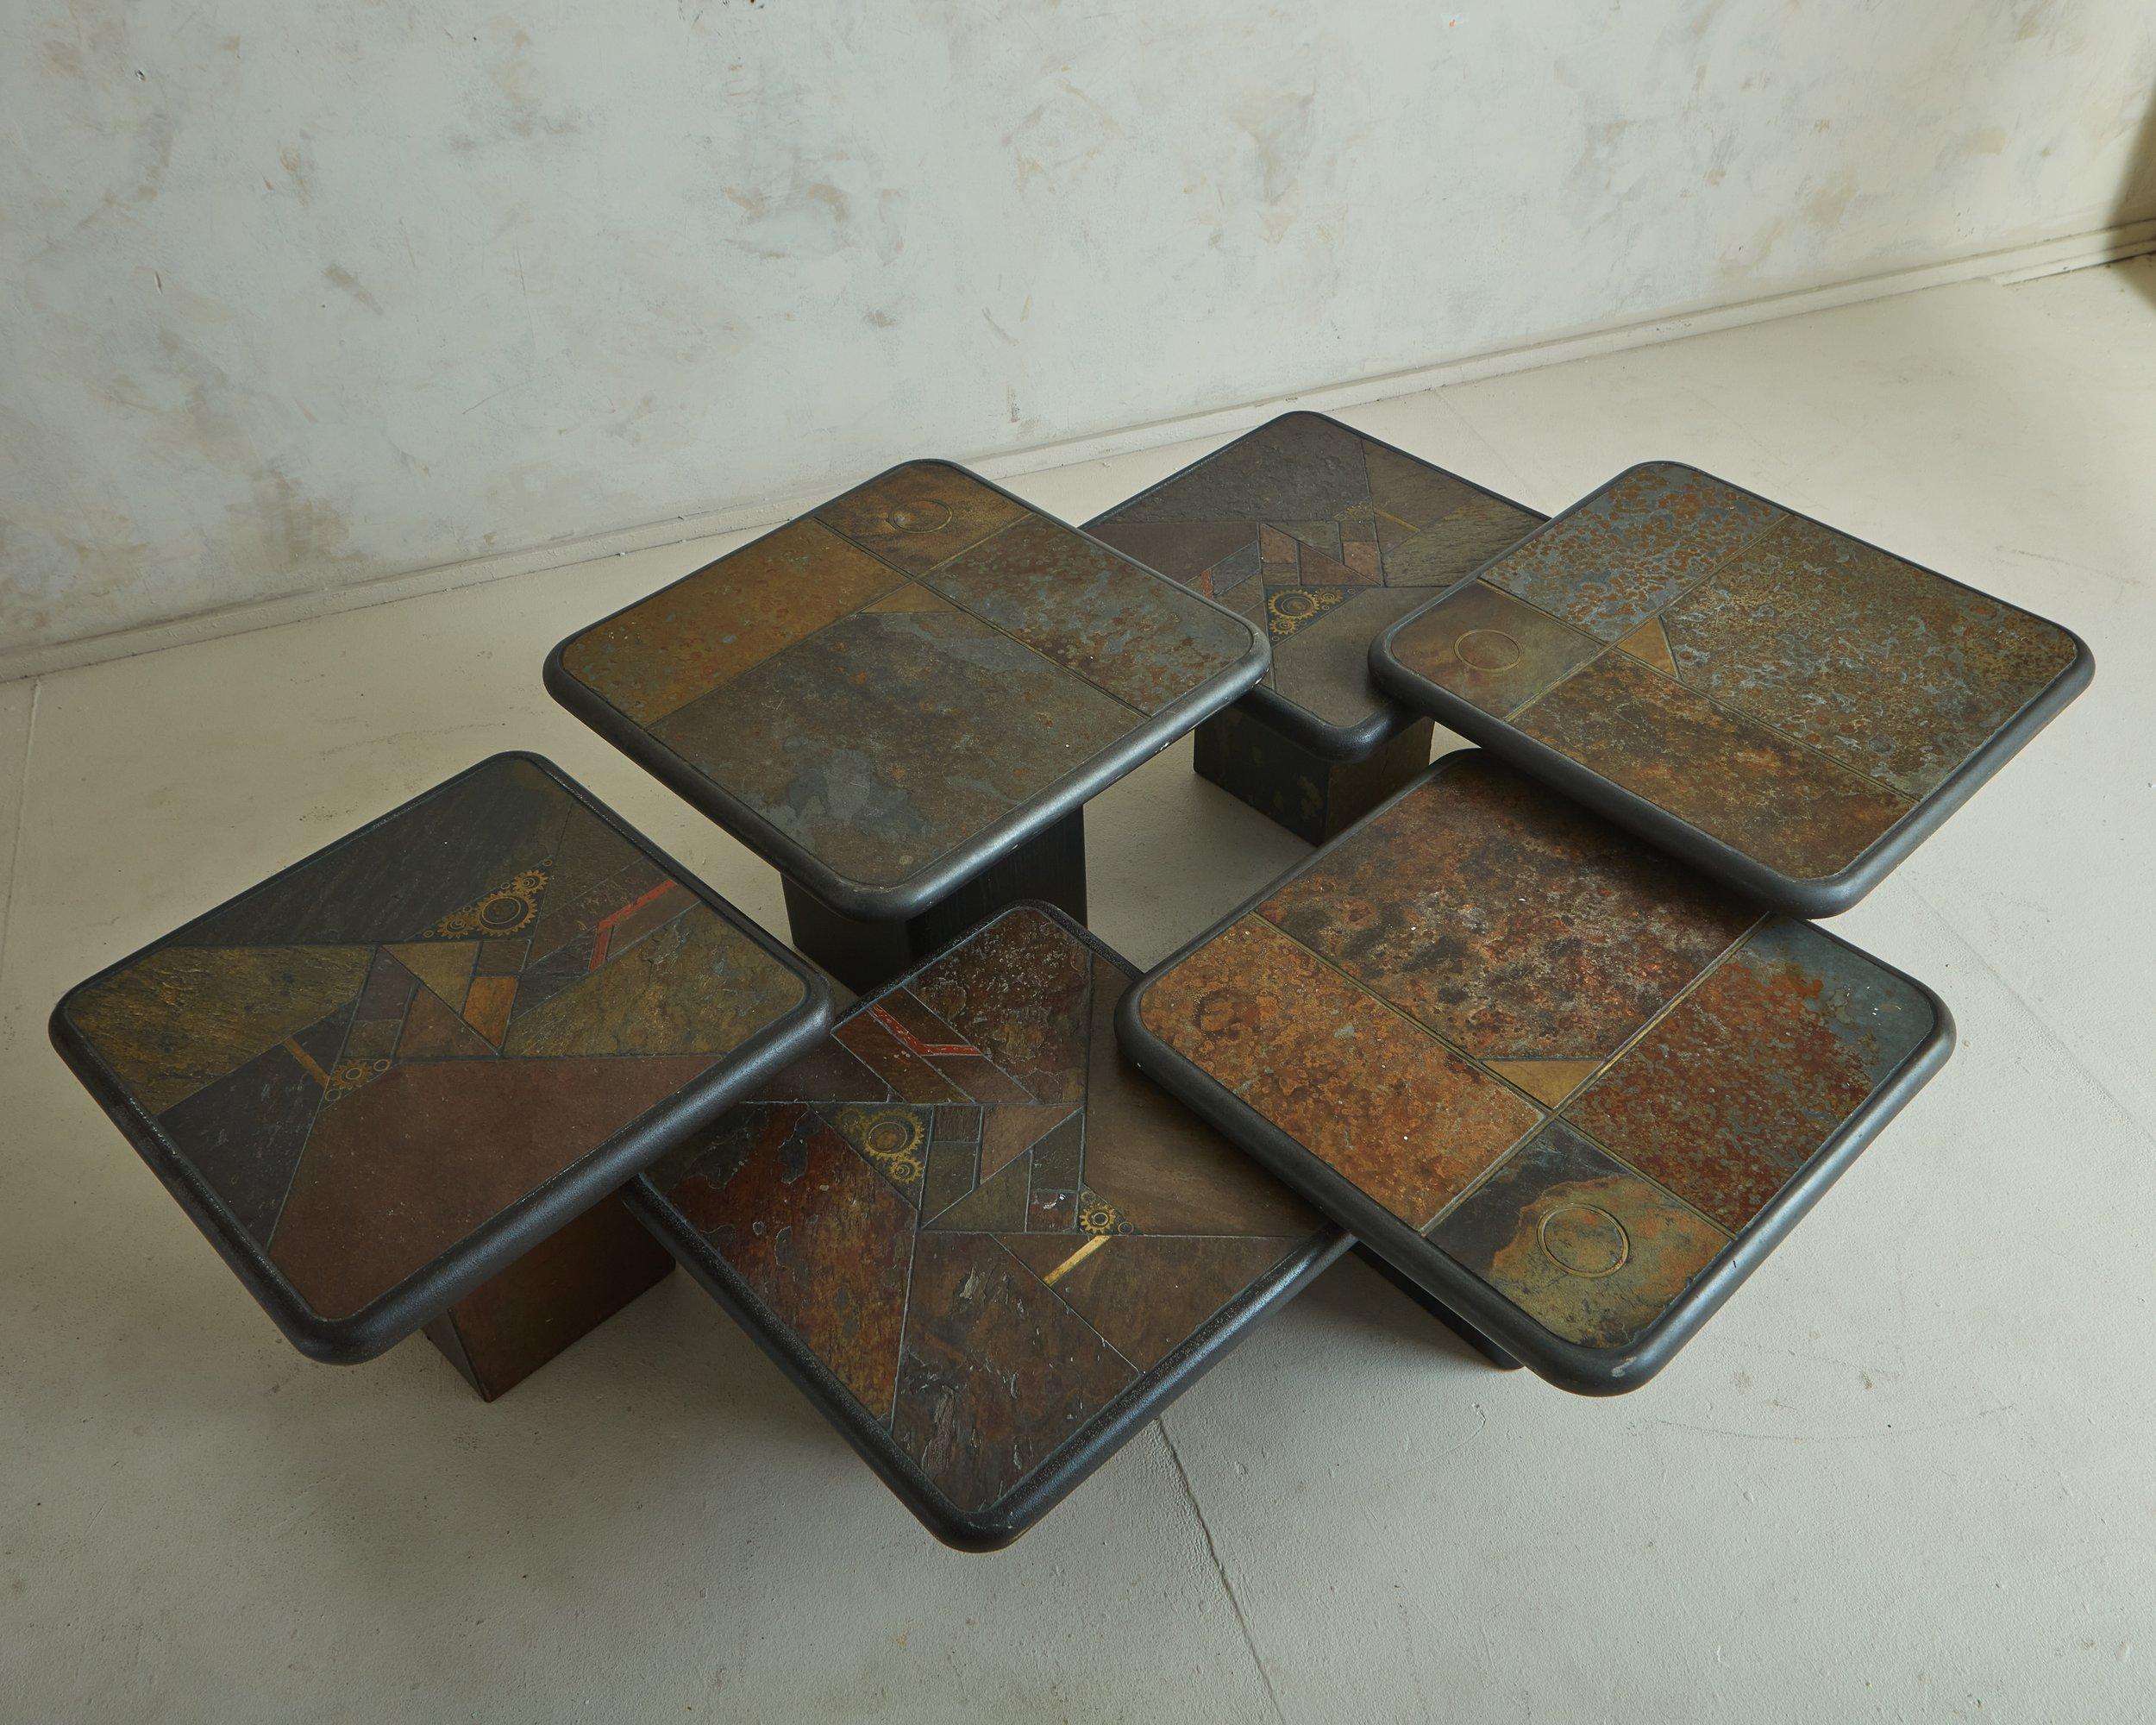 A trio of nesting mosaic tables designed by Dutch Sculptor, Paul Kingma and produced by Kneip in 1998. The table tops feature a mosaic of inlaid metal finishes, artfully crafted, with rounded edges and rest on wood bases. (The second set available